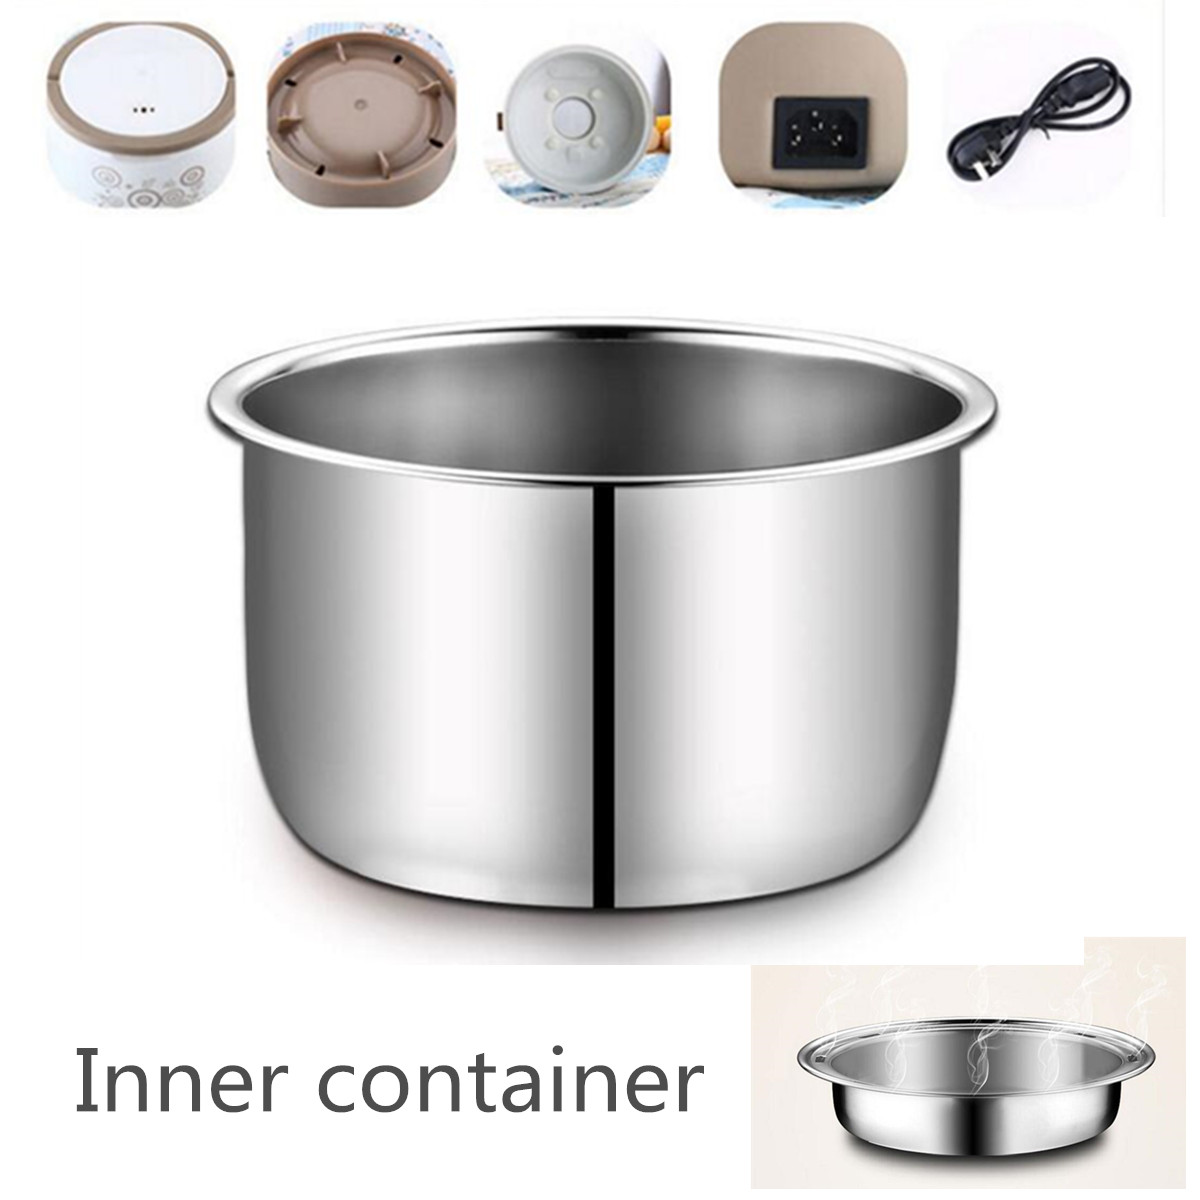 2L Mini Stainless Steel 3 Layers Electric Rice Cooker Steamer Portable Meal Thermal Heating Lunch Box Food Container Warmer